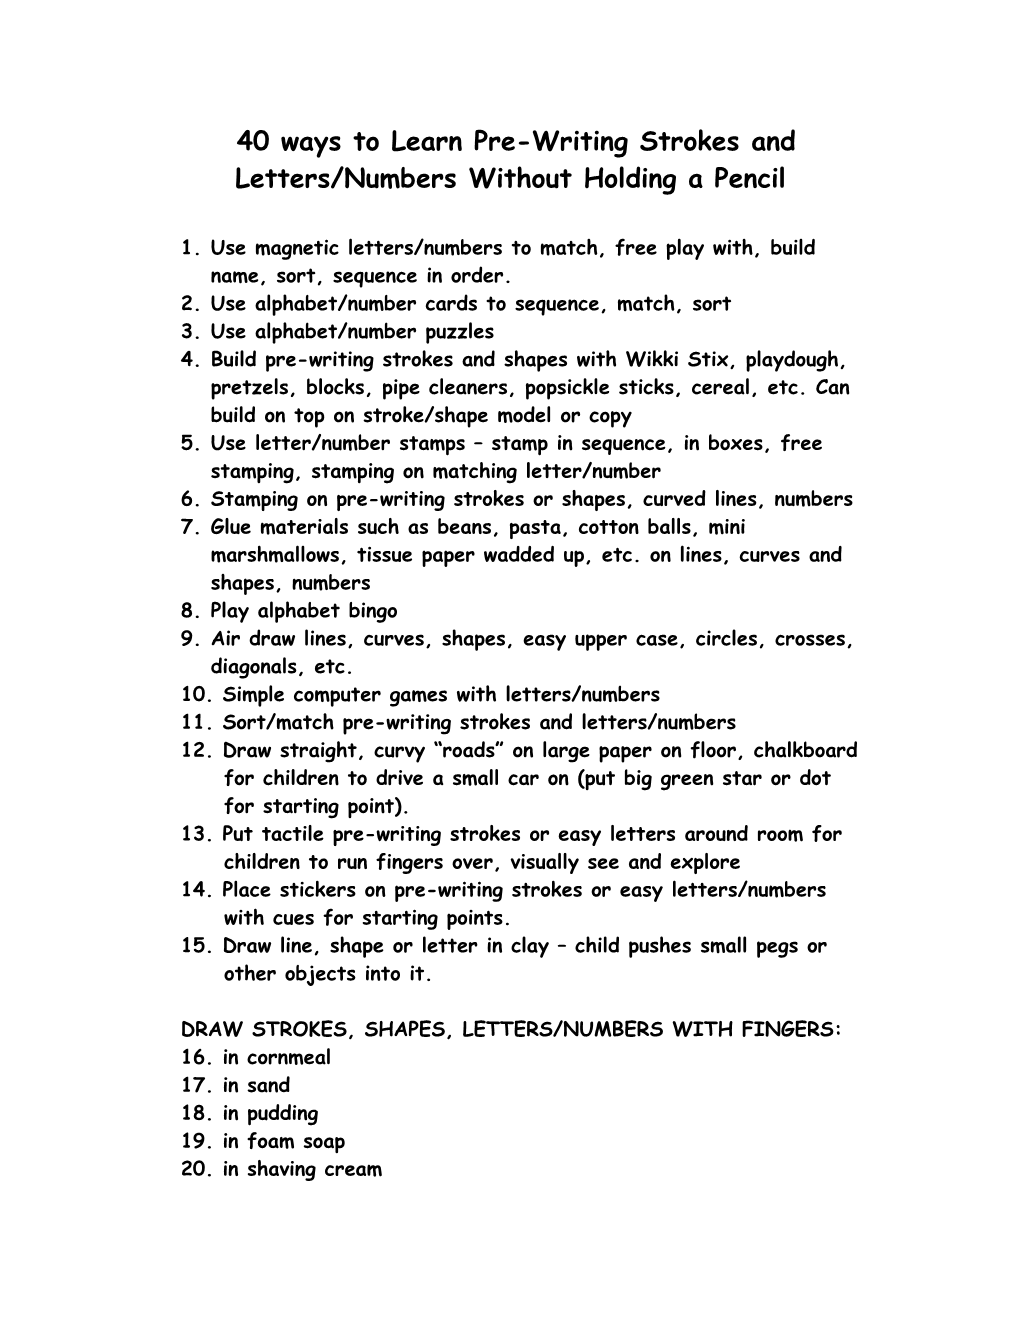 More Than 30 Ways to Learn Pre-Writing and Letters Without Holding a Pencil